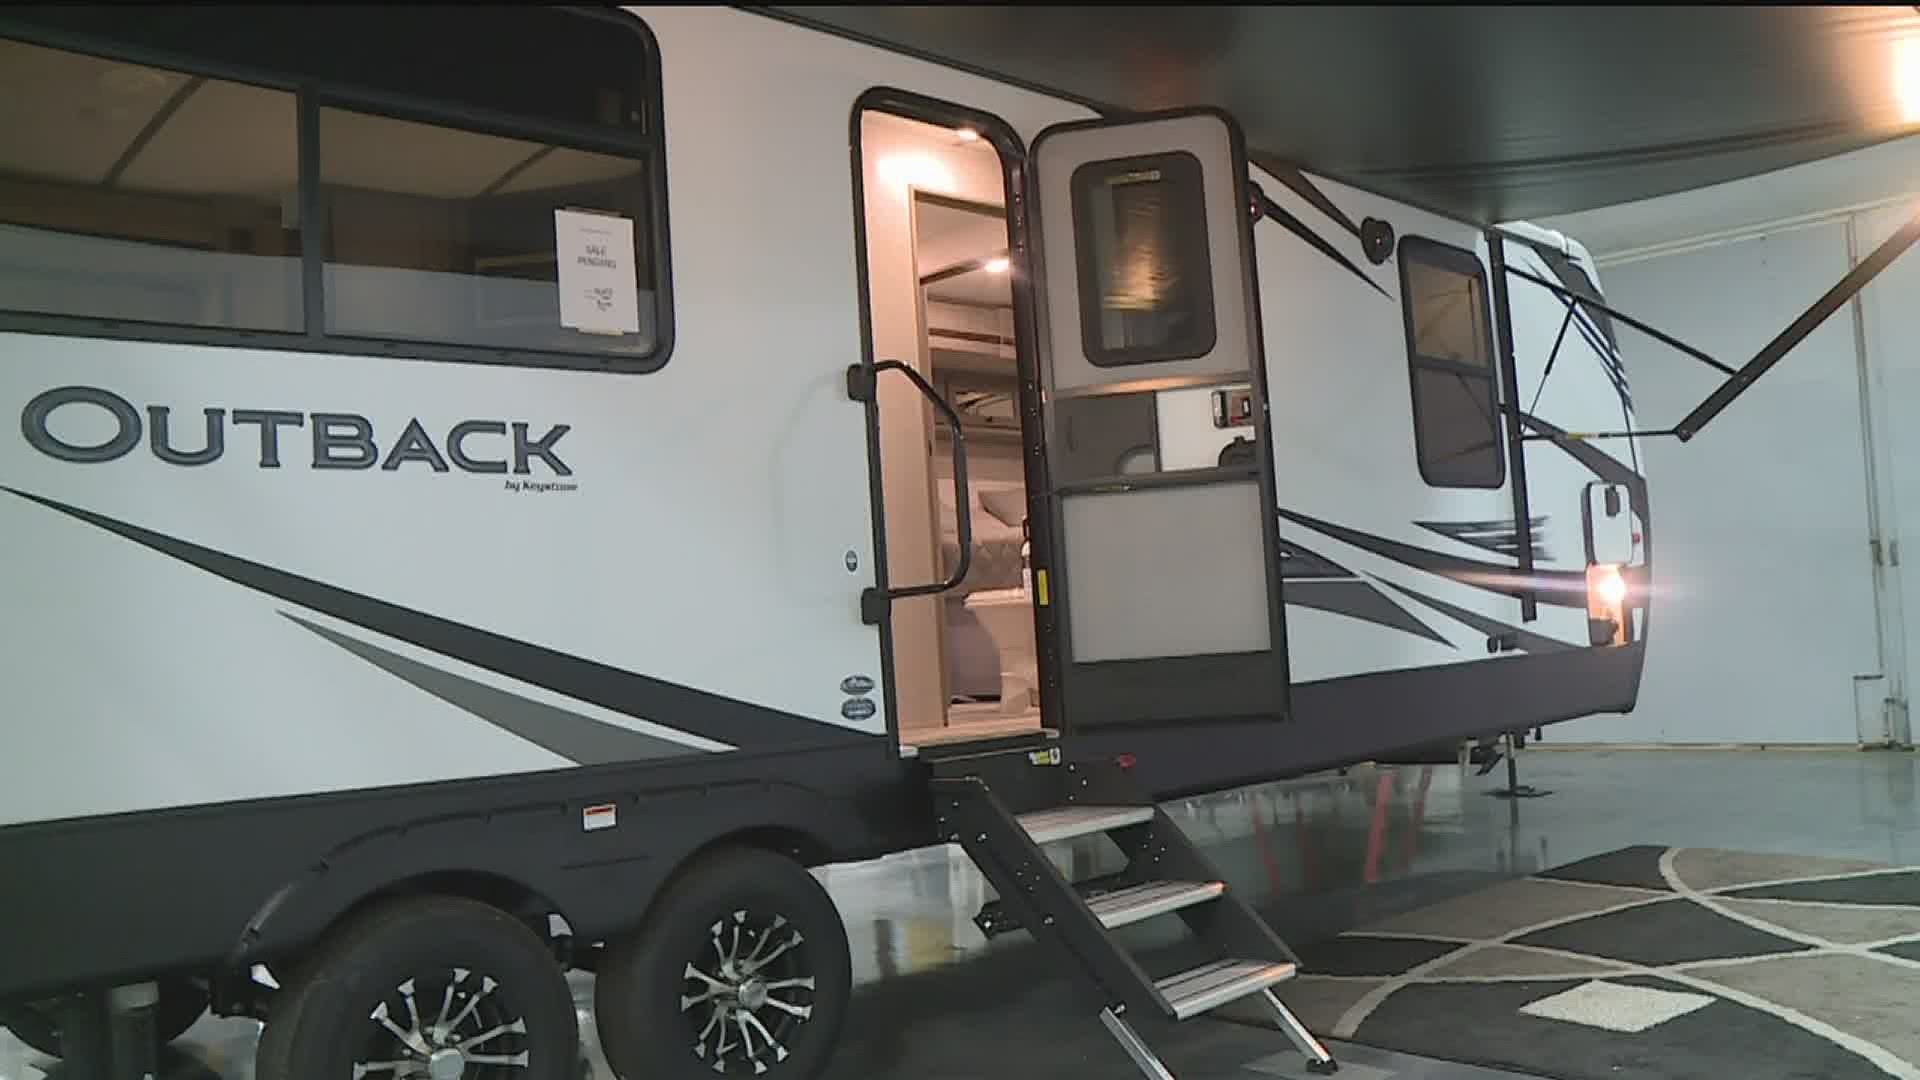 At Terry Frazer's RV Center, they're seeing an all-time high in RV sales, but say the demand can't keep up, due to manufacturing shortages brought about by Covid.